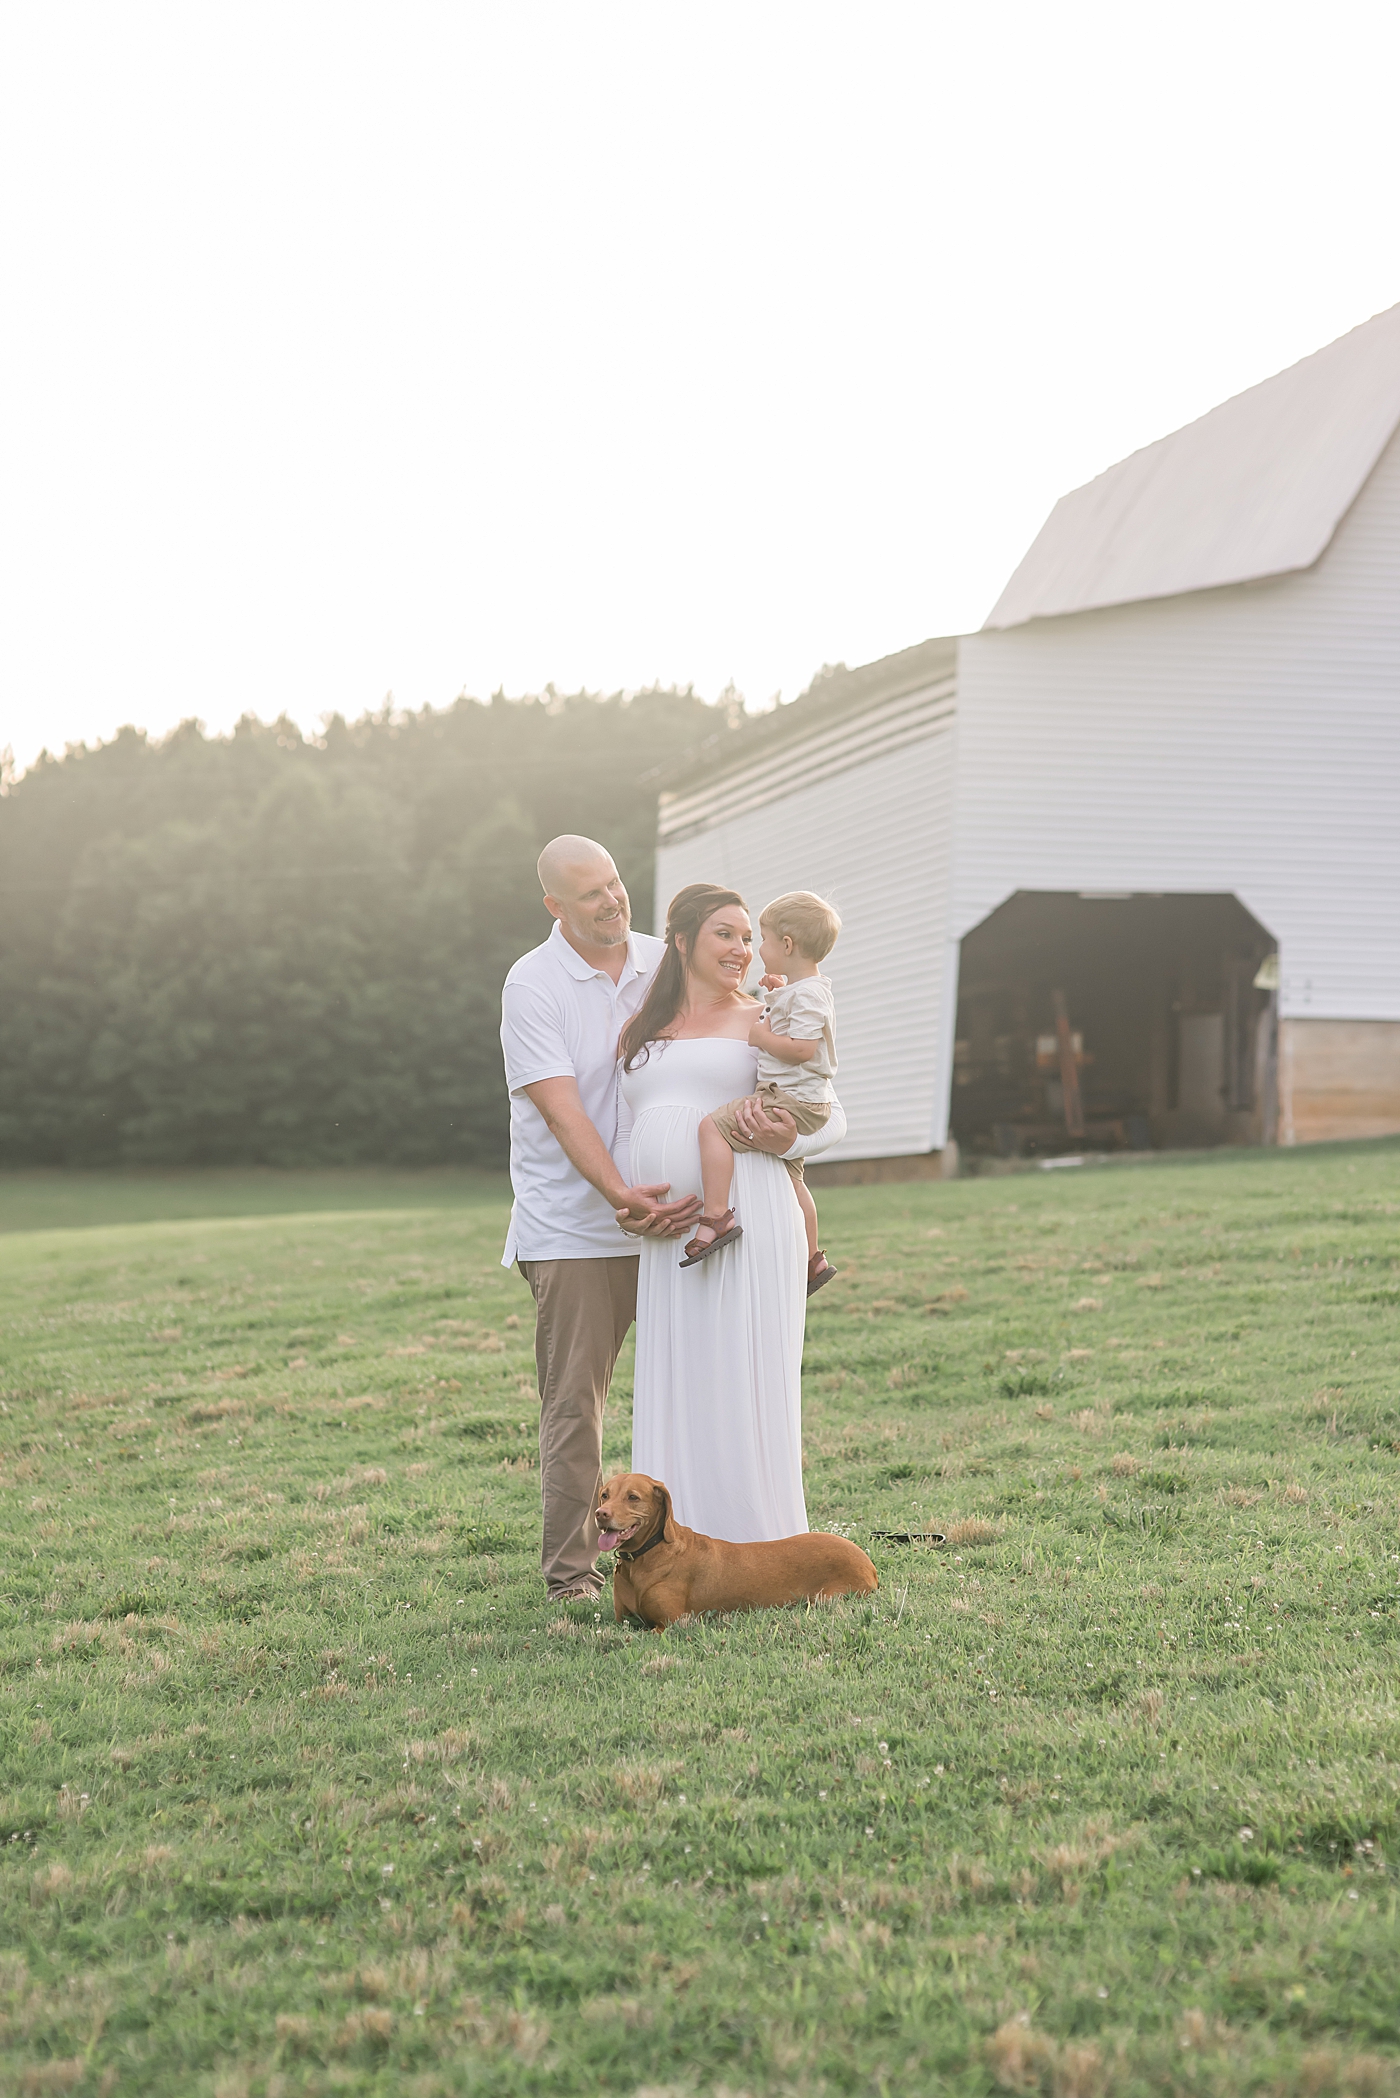 Mom and dad in white smiling at their toddler | Photo by Denver NC Maternity Photographer Anna Wisjo